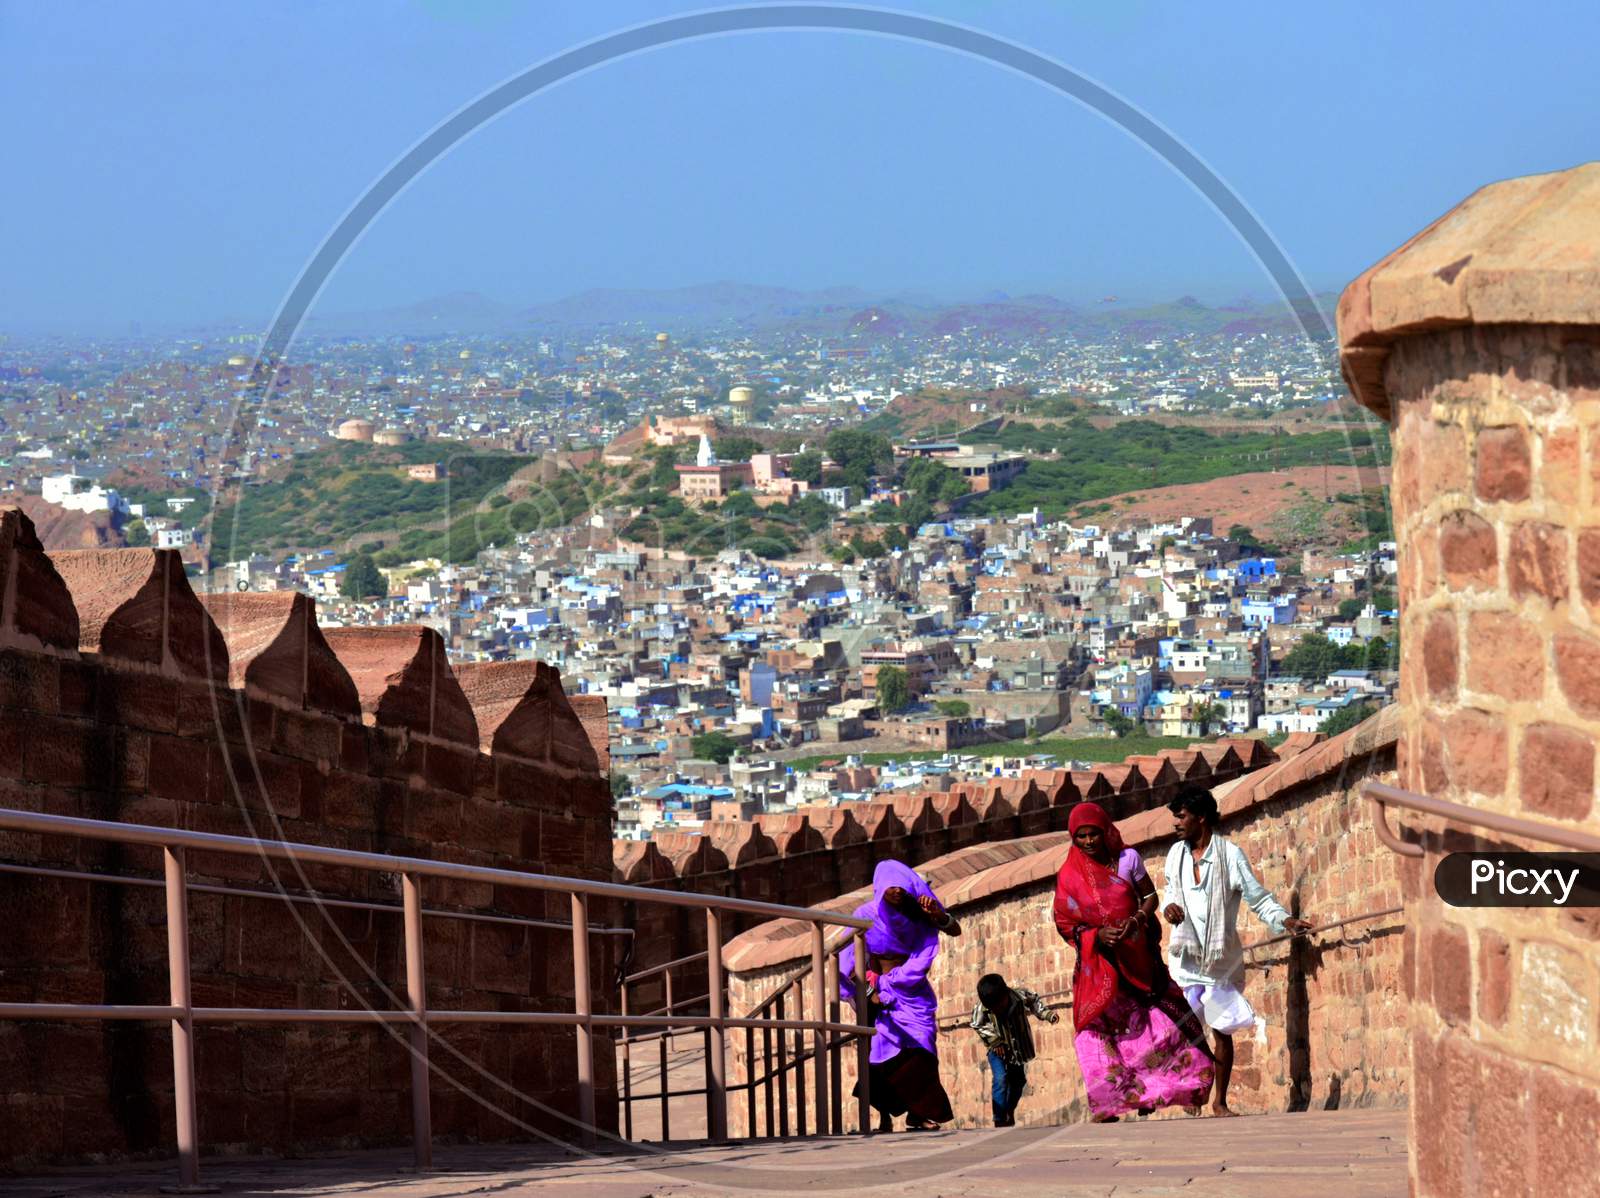 Some people in Mehrangarh Fort,Rajasthan with Jodh Pur City in the Back Ground